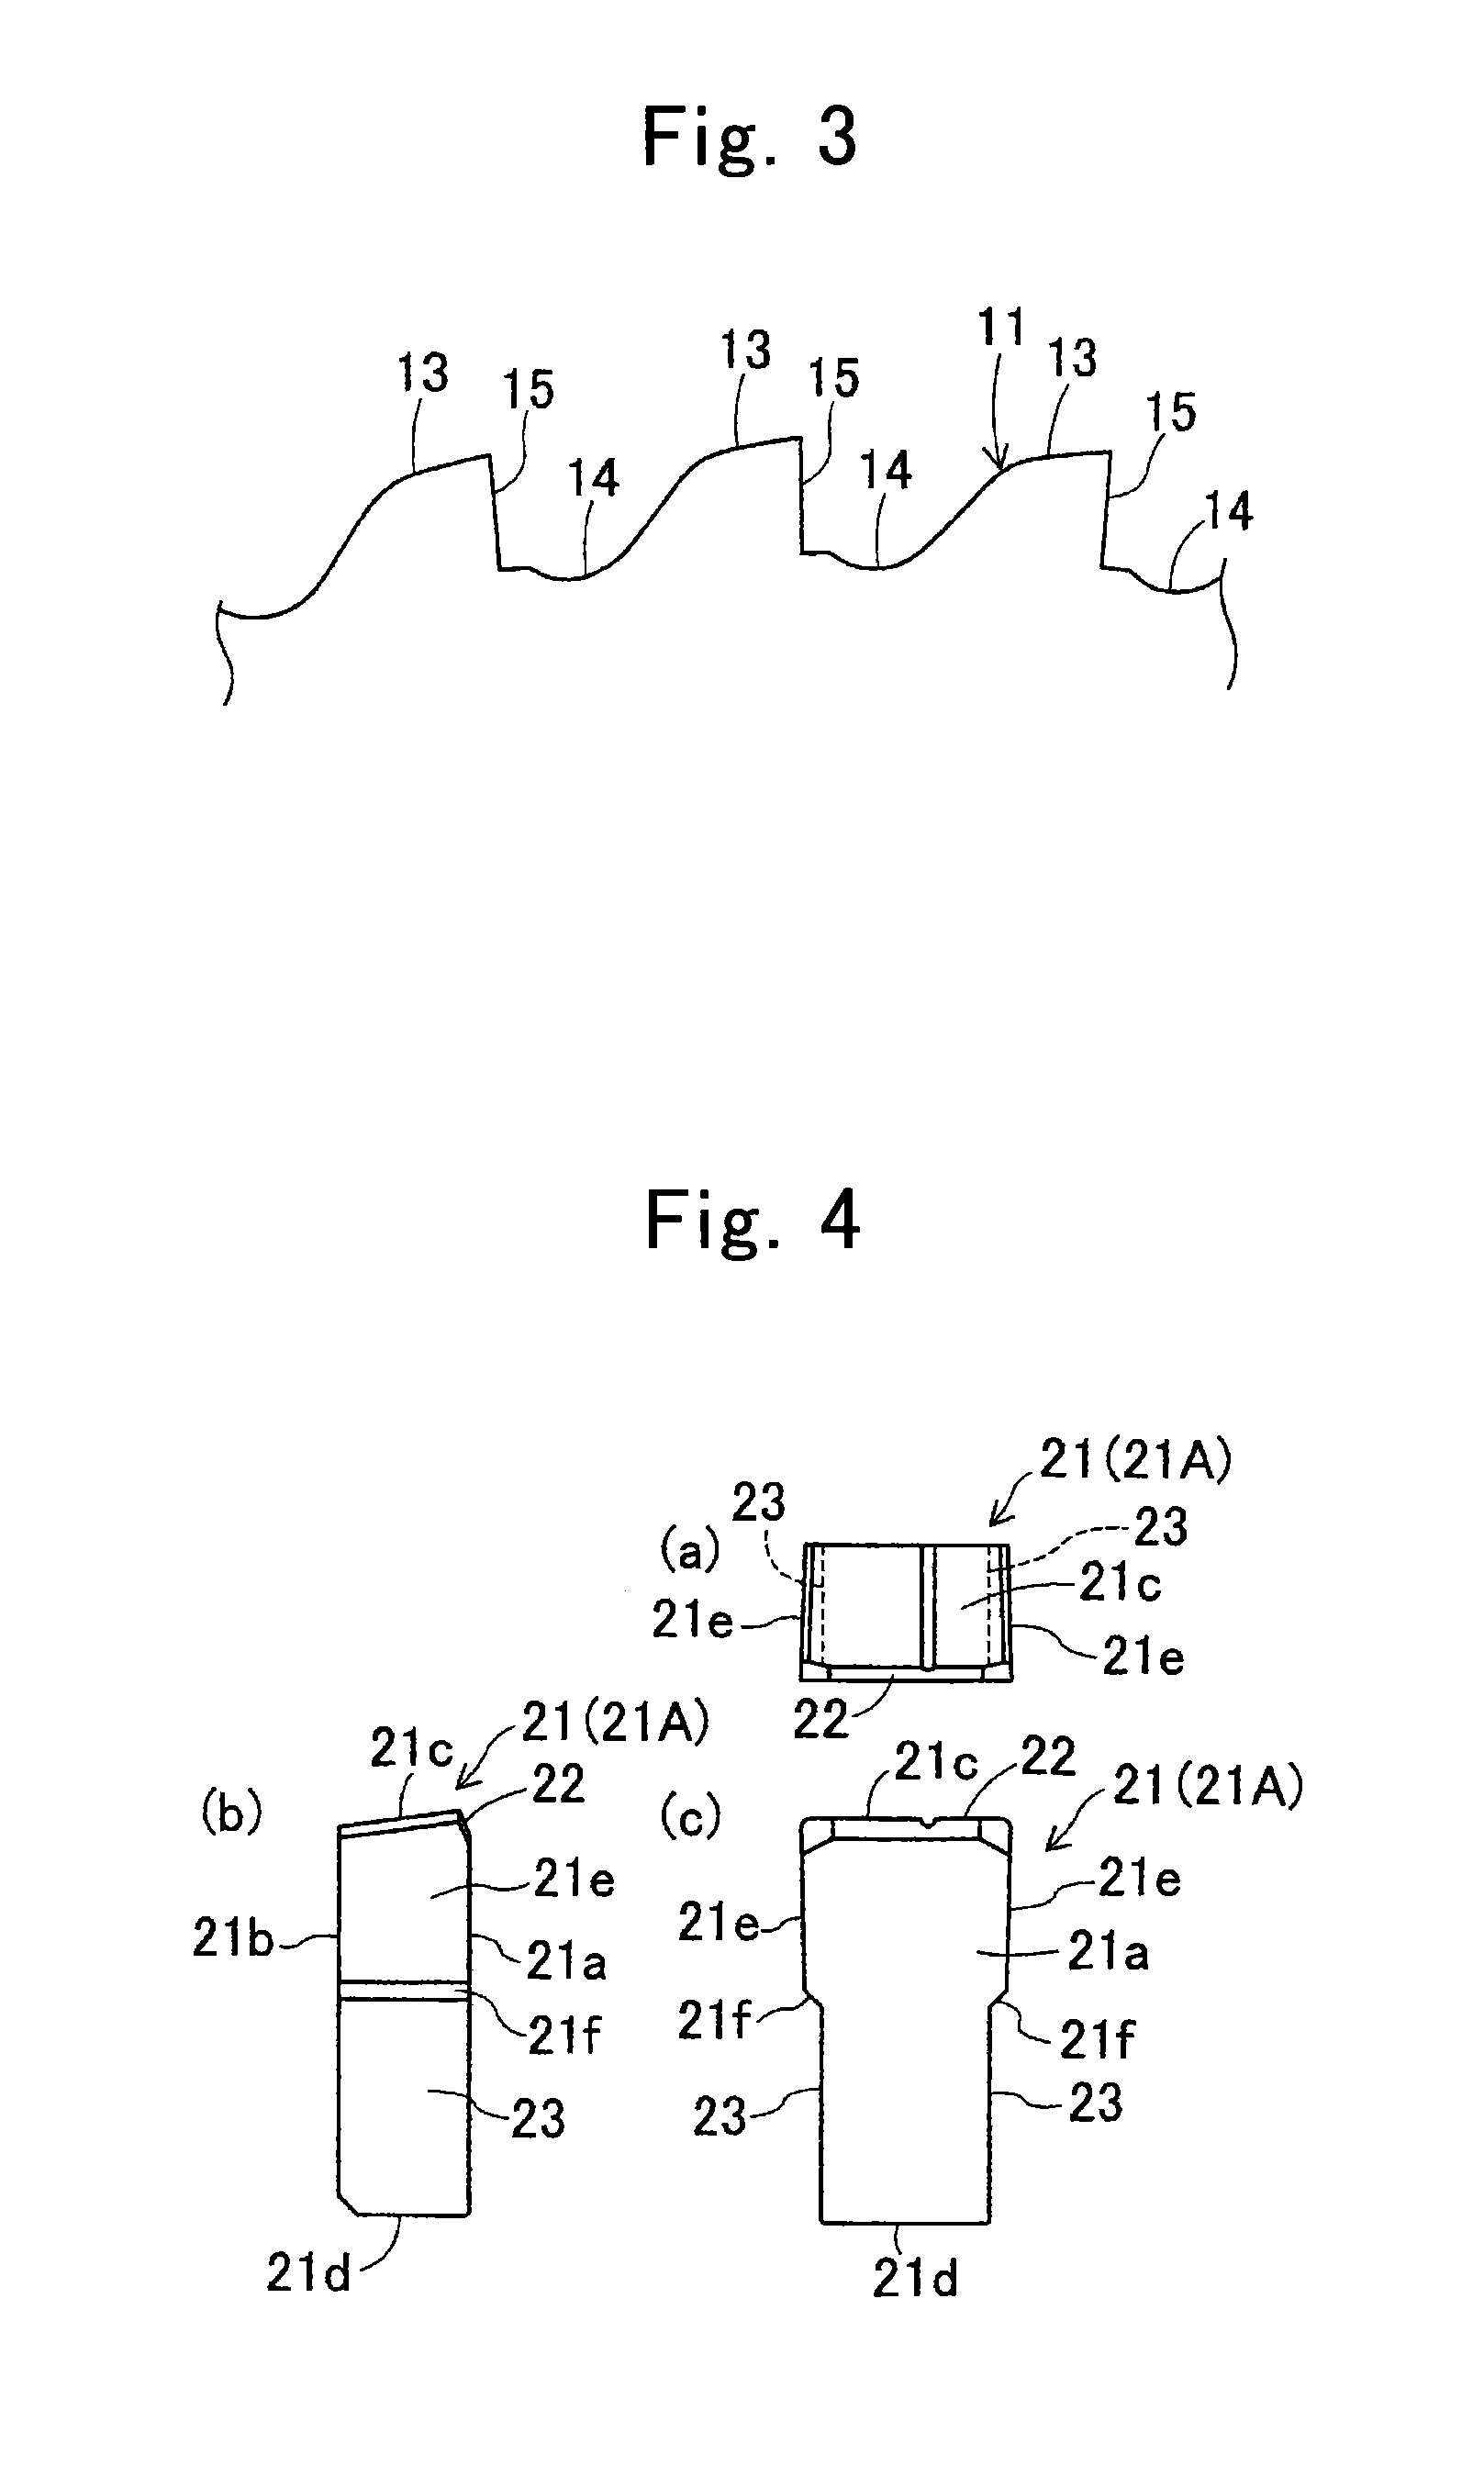 Method for manufacturing a tipped circular saw blade